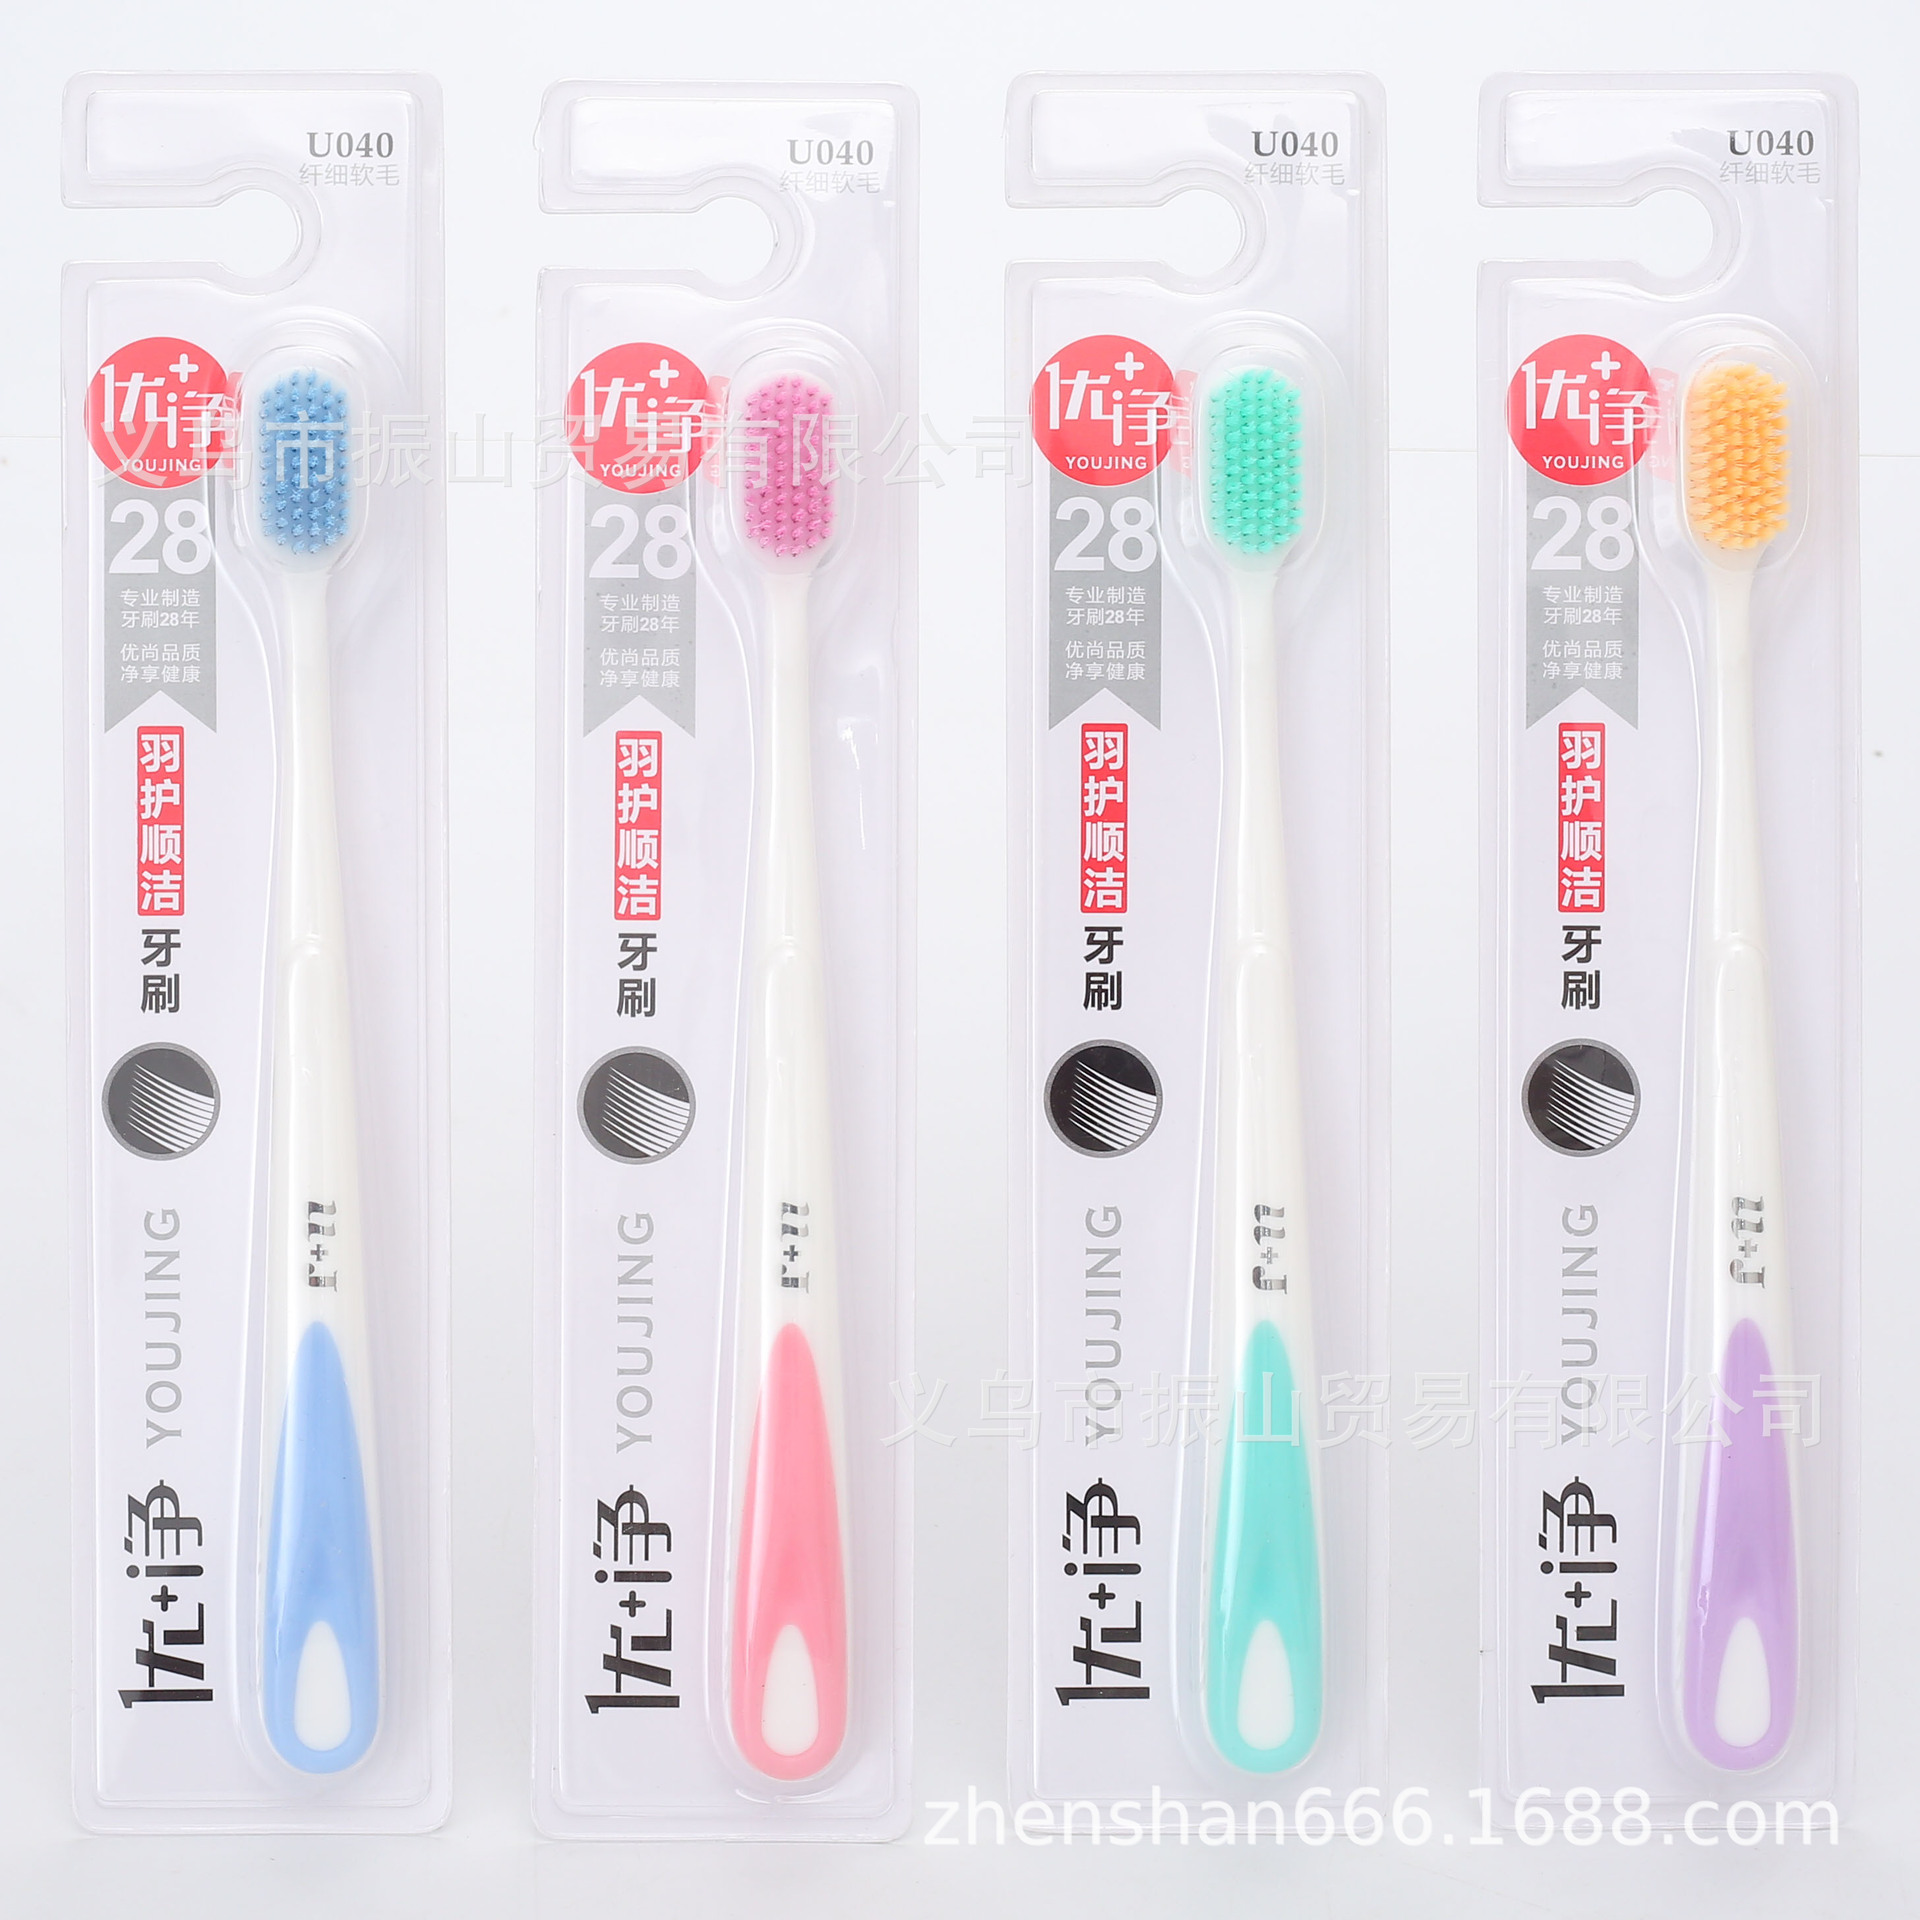 excellent + net 040 guangdong sanxiao company produces 30 pcs toothbrush